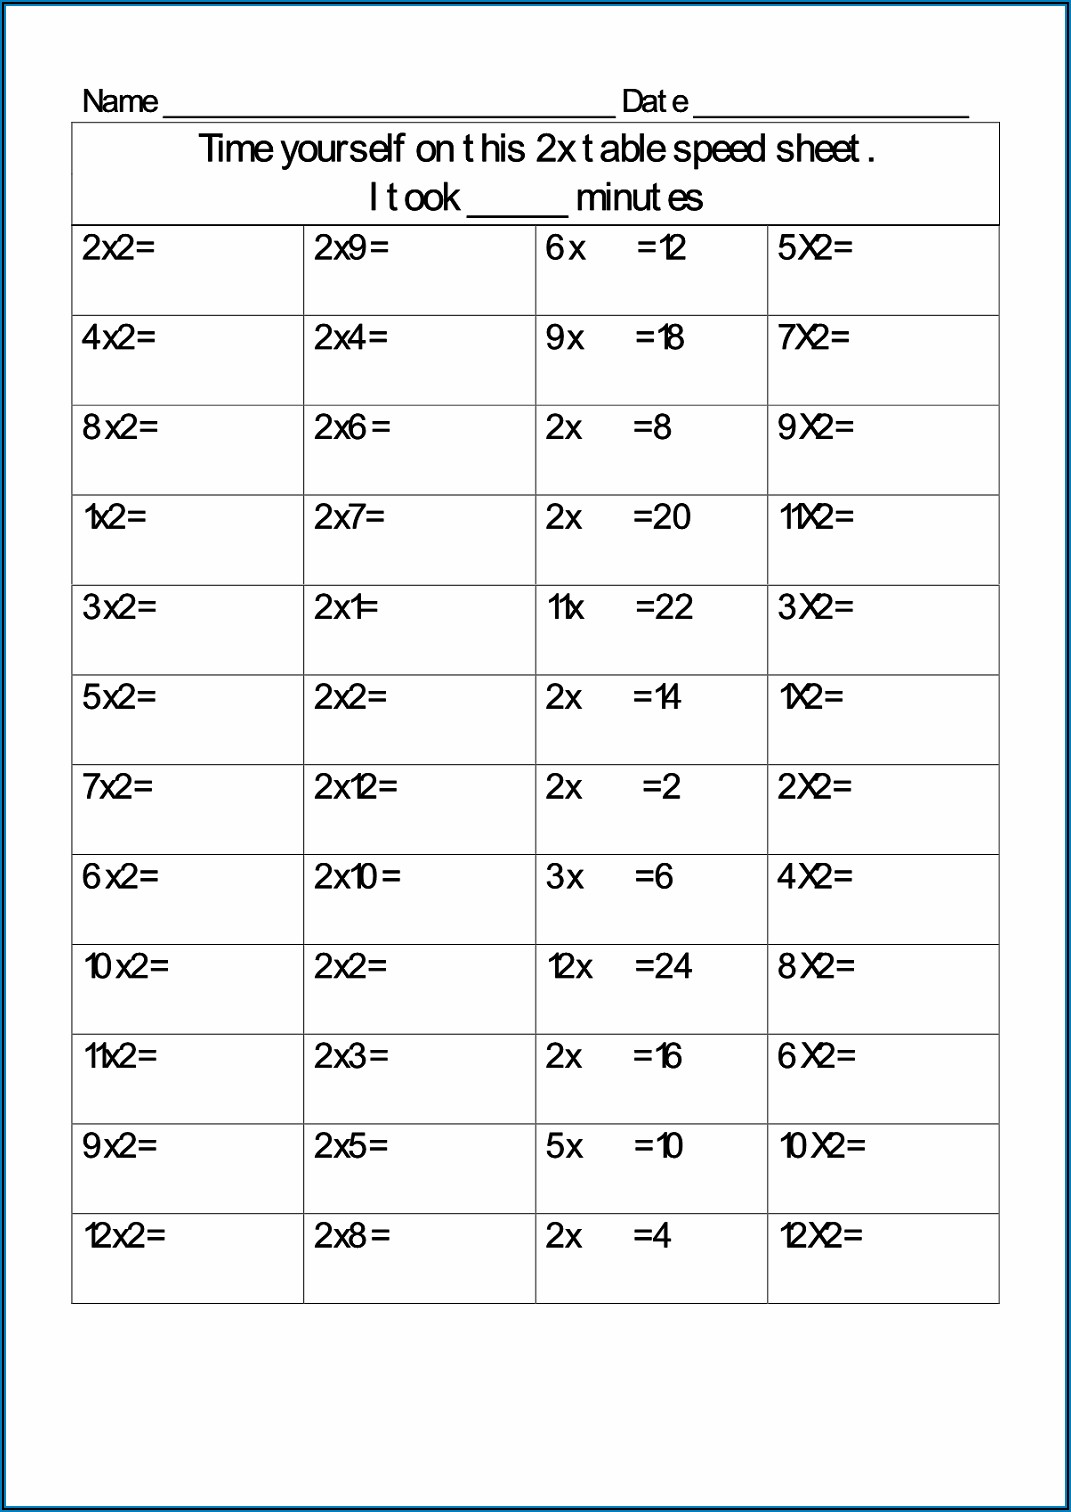 2 Times Table Practise Sheet